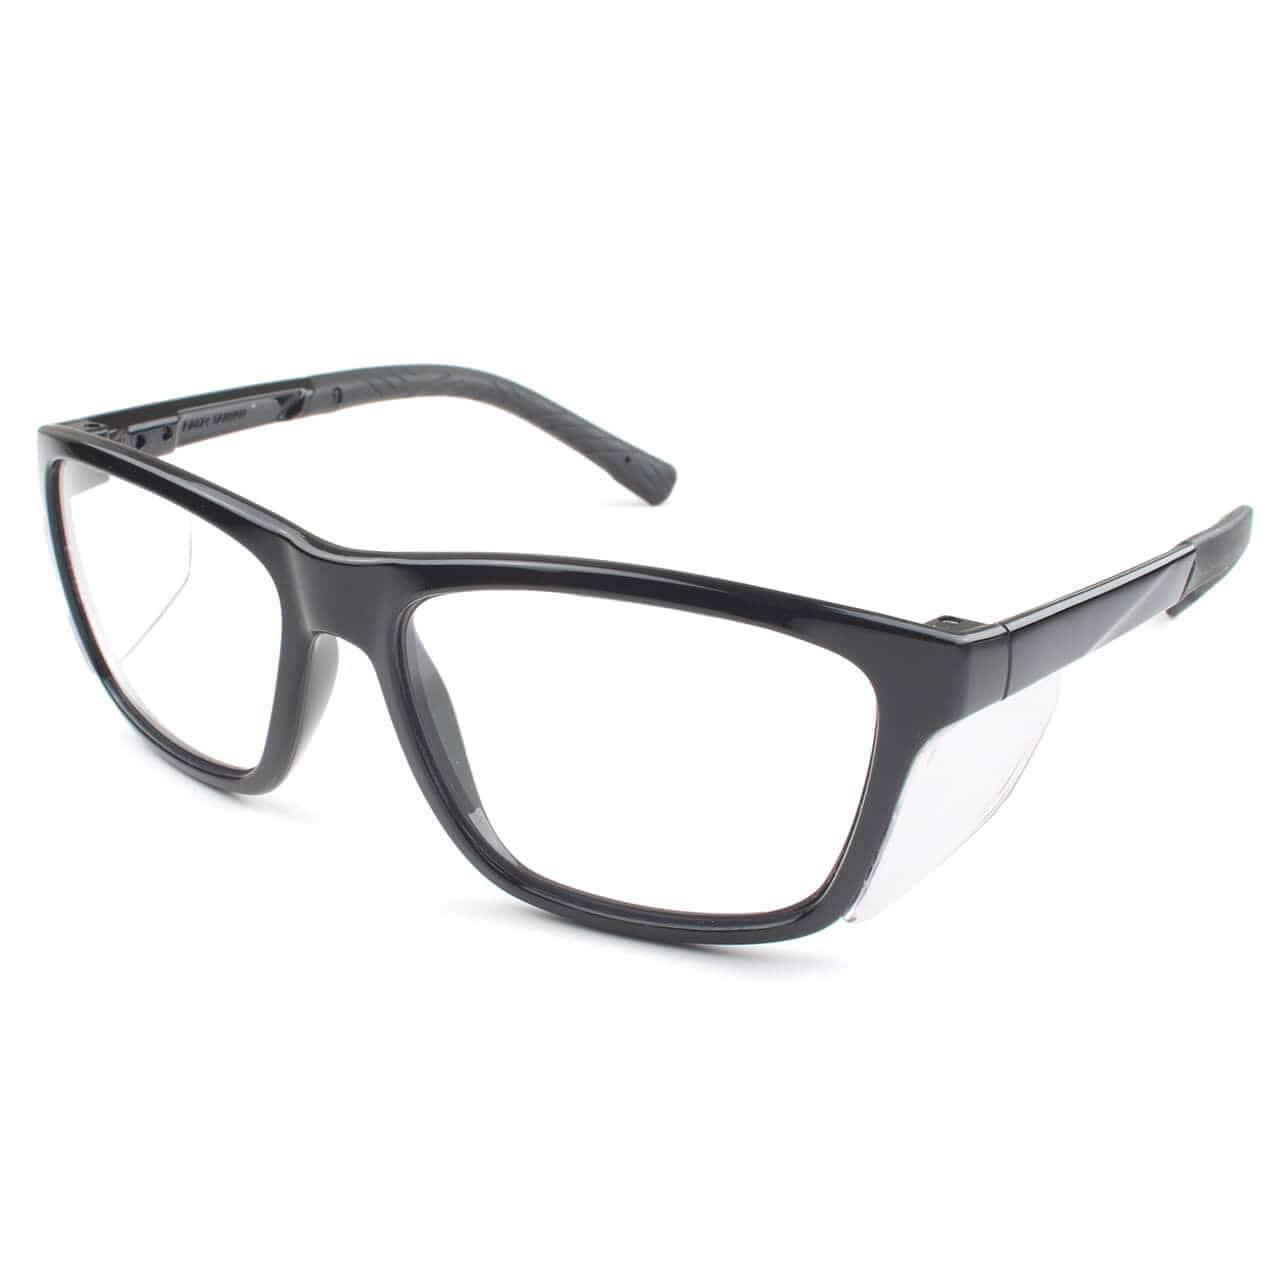 Metel M40 Safety Glasses with Black Frame and Clear Lenses